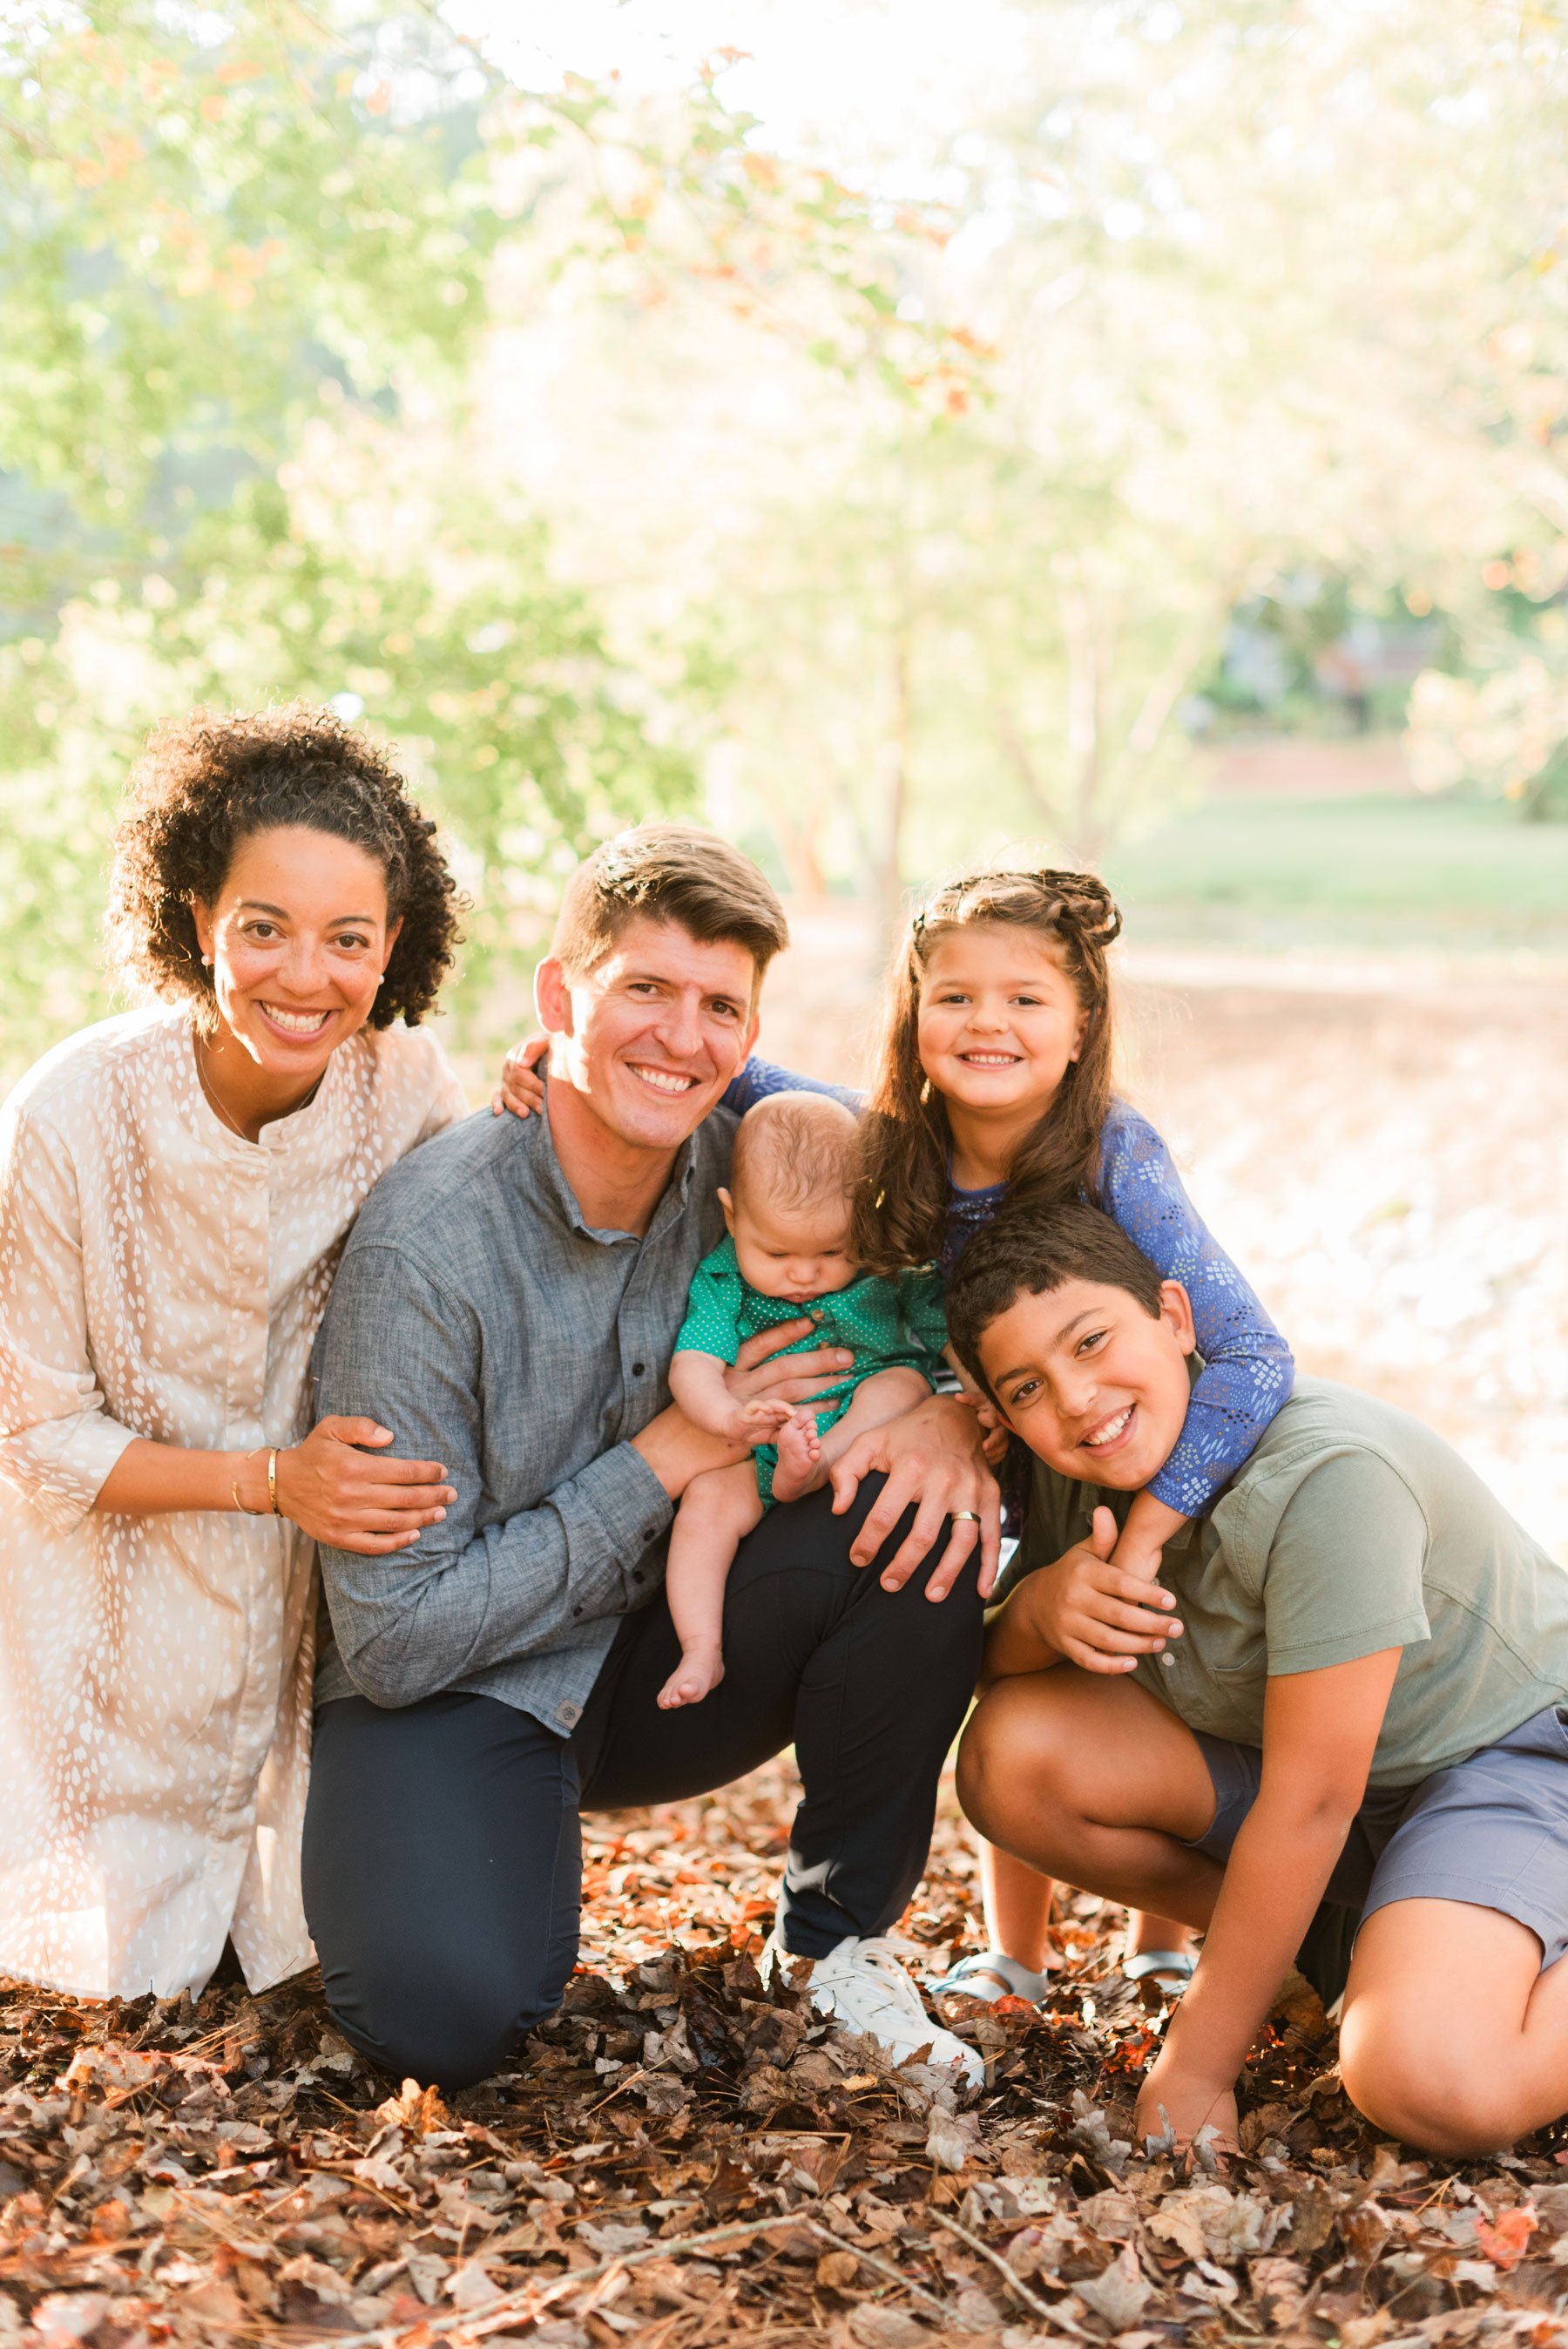    This family portrait will look gorgeous printed for holiday cards or on the walls of their Georgia home. #atlantafamilyphotographer #familyphotoswithkids #familyoutfitinspo #confidentkids #kidsselfesteem # confidencetips #georgiafamilyphotos #geor